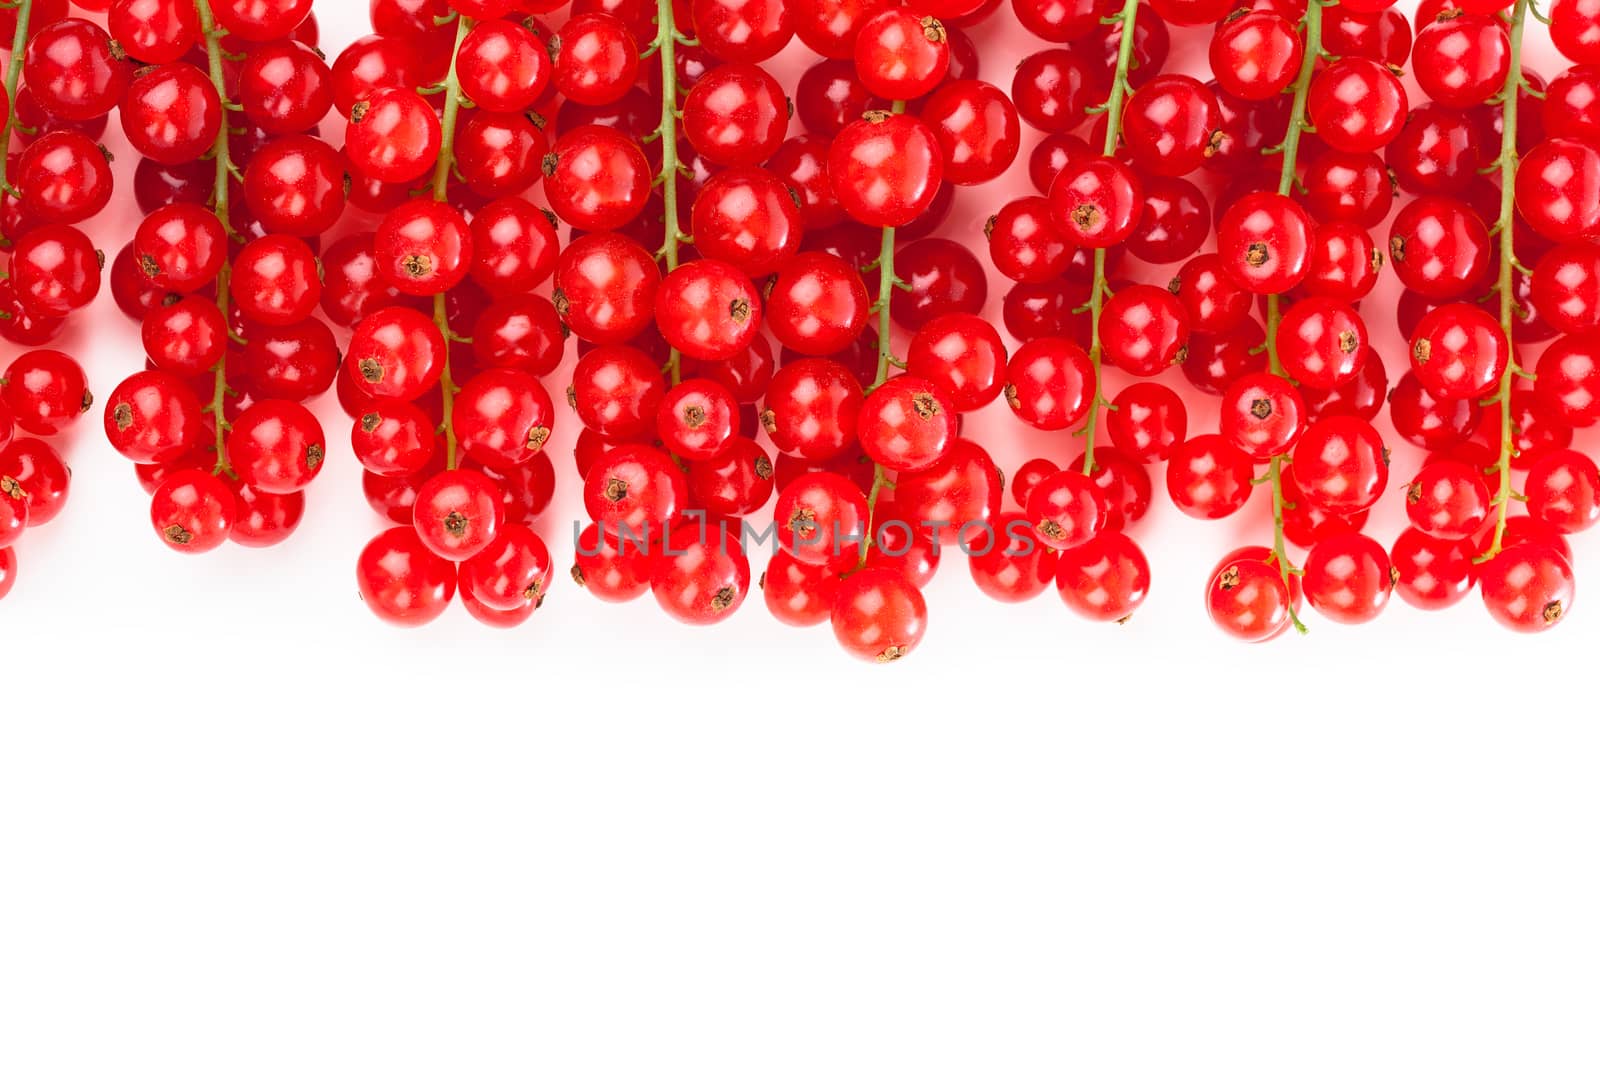 red currant on a white background
 by motorolka